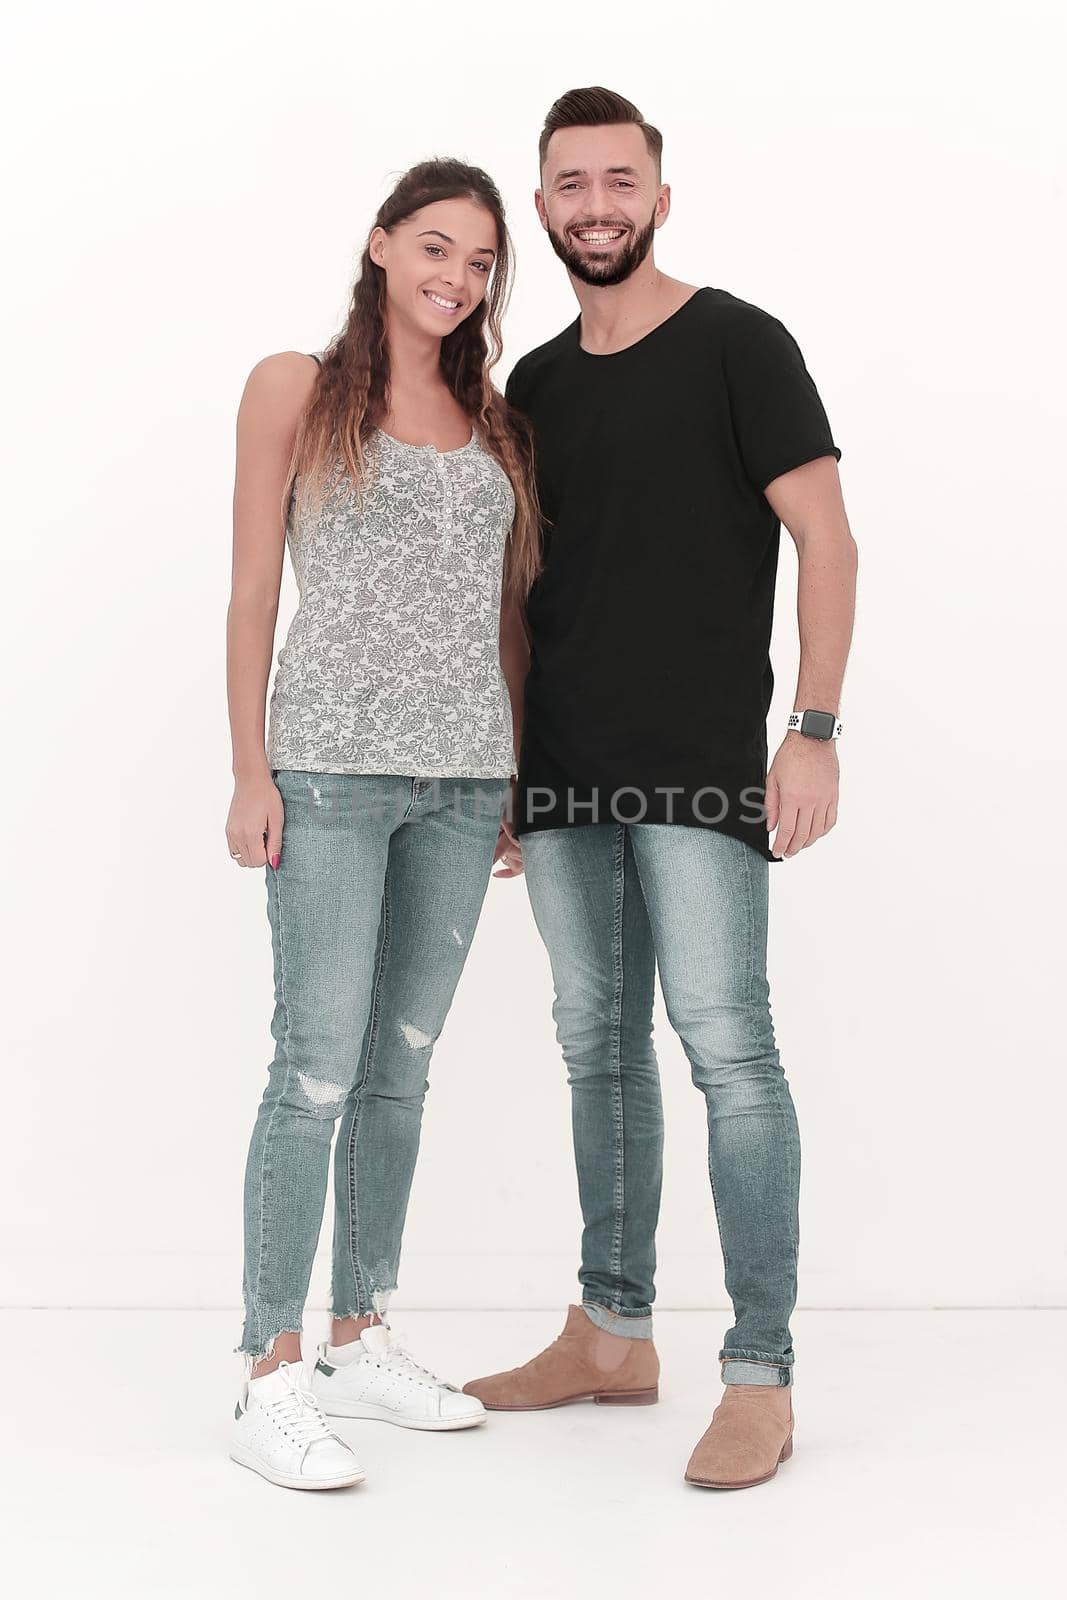 in full growth.beautiful young couple.isolated on white background